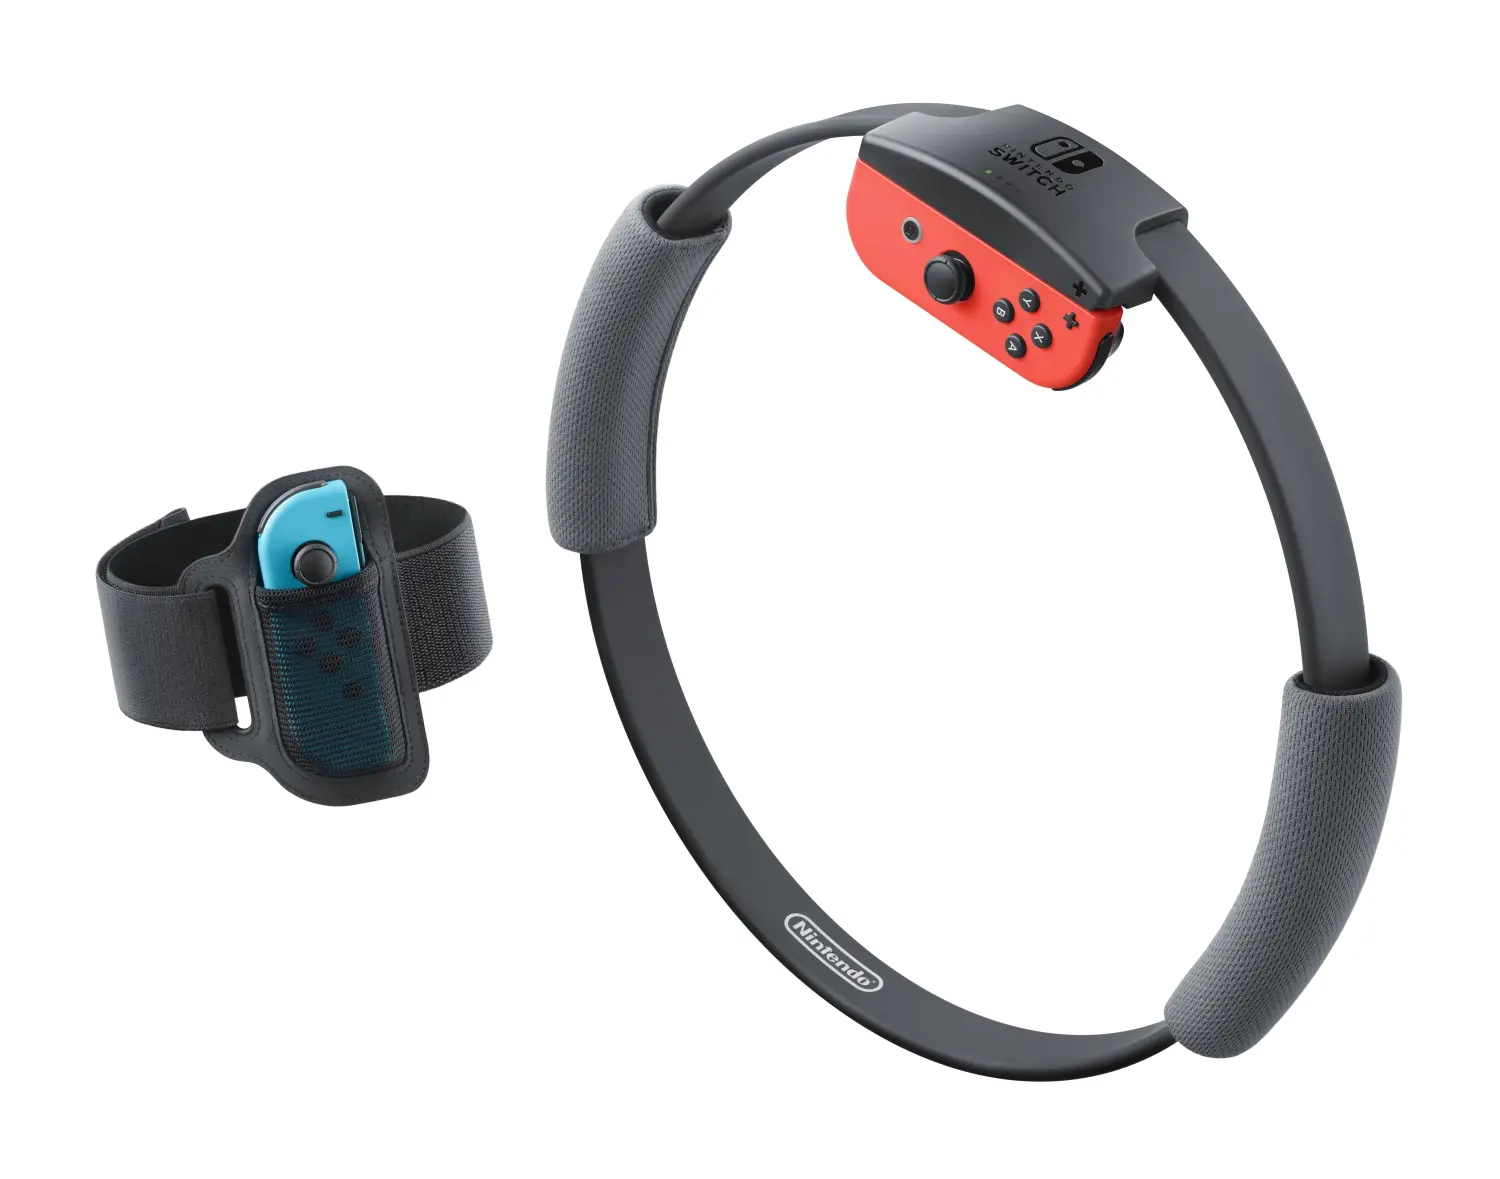 Nintendo Switch Ring Fit Adventure - Gdg